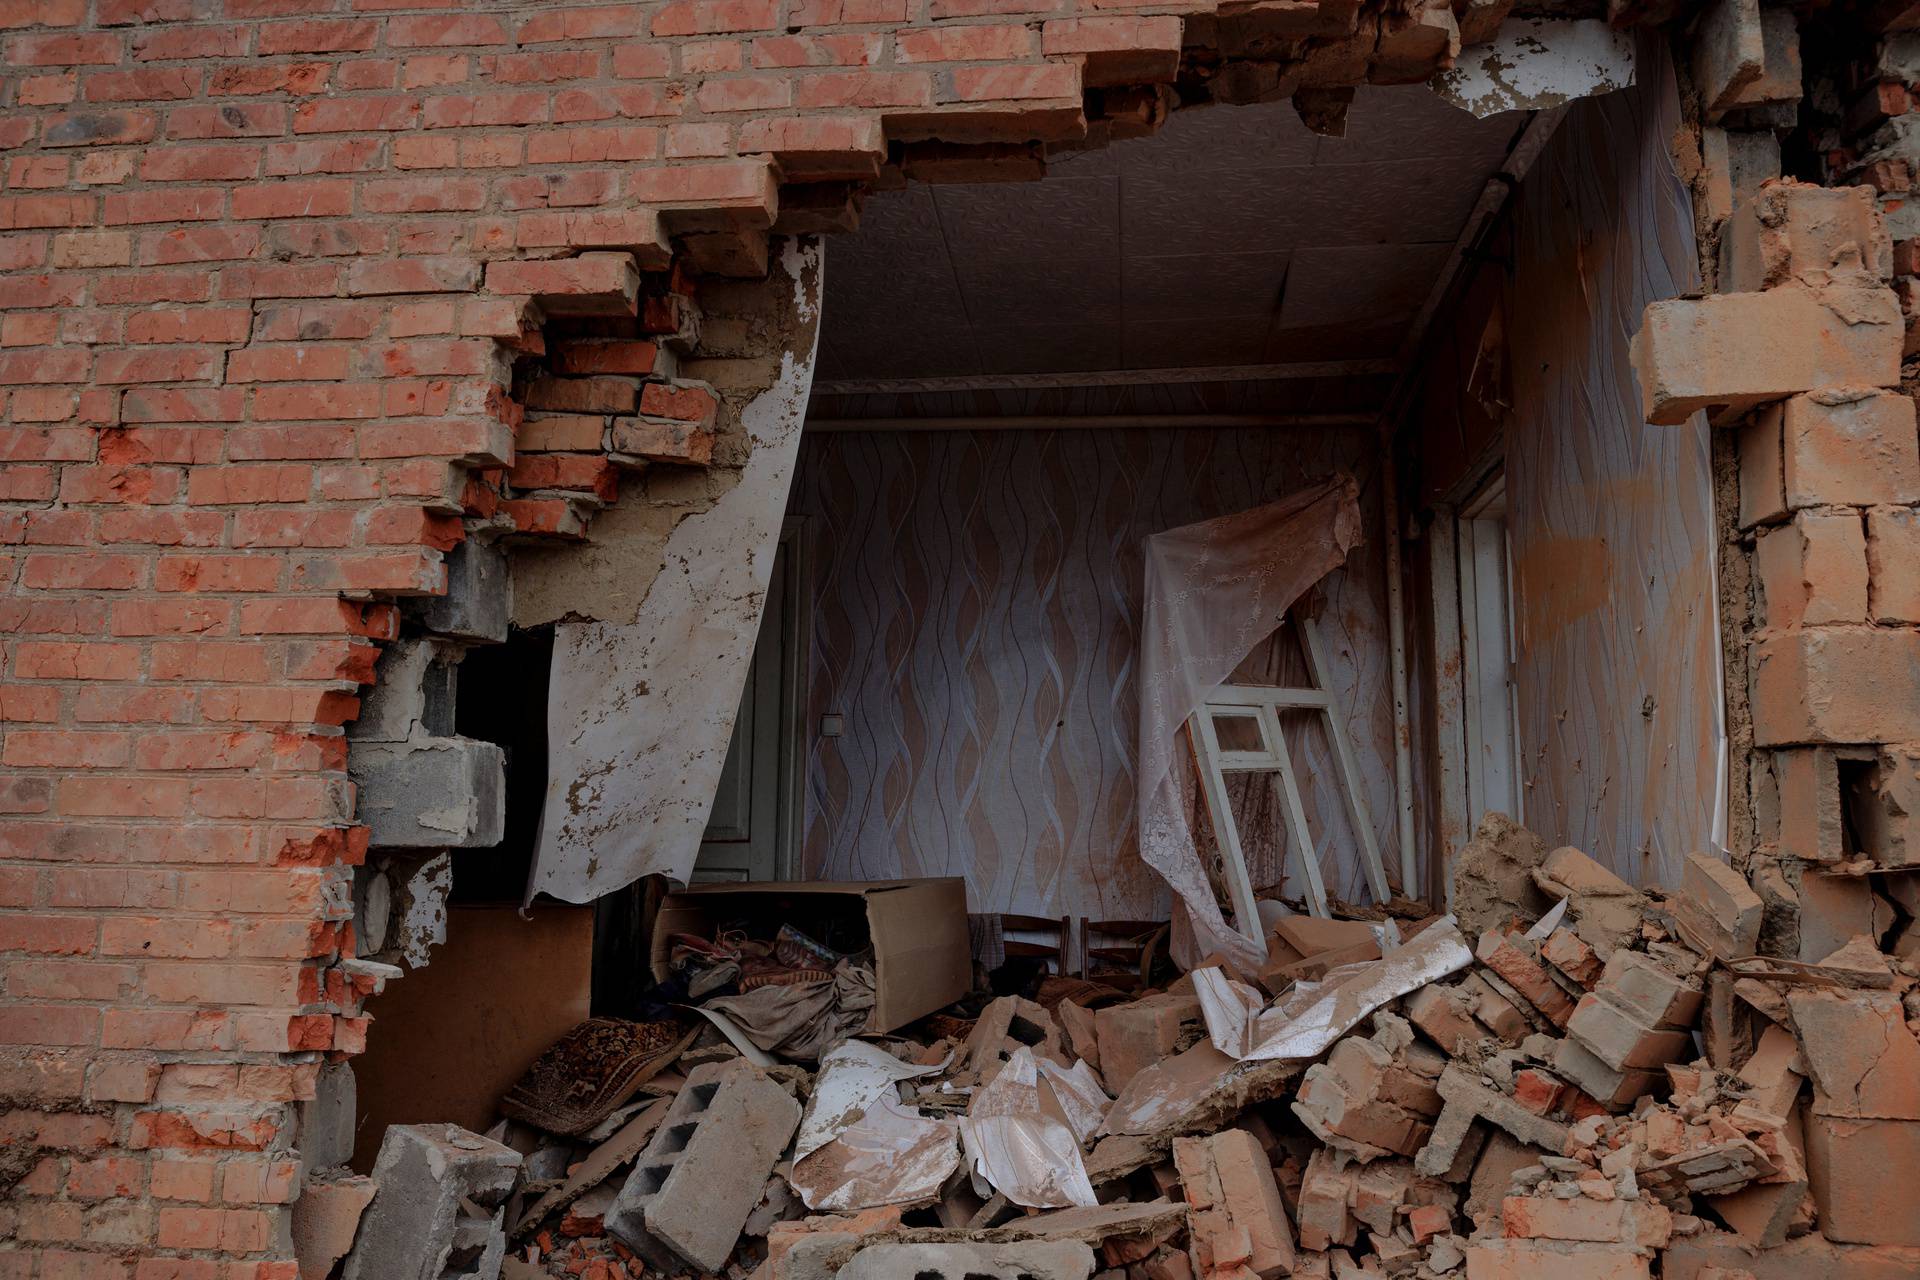 Debris covers the floor in a house that was directly hit by a projectile during heavy shelling in the town of Derhachi outside Kharkiv